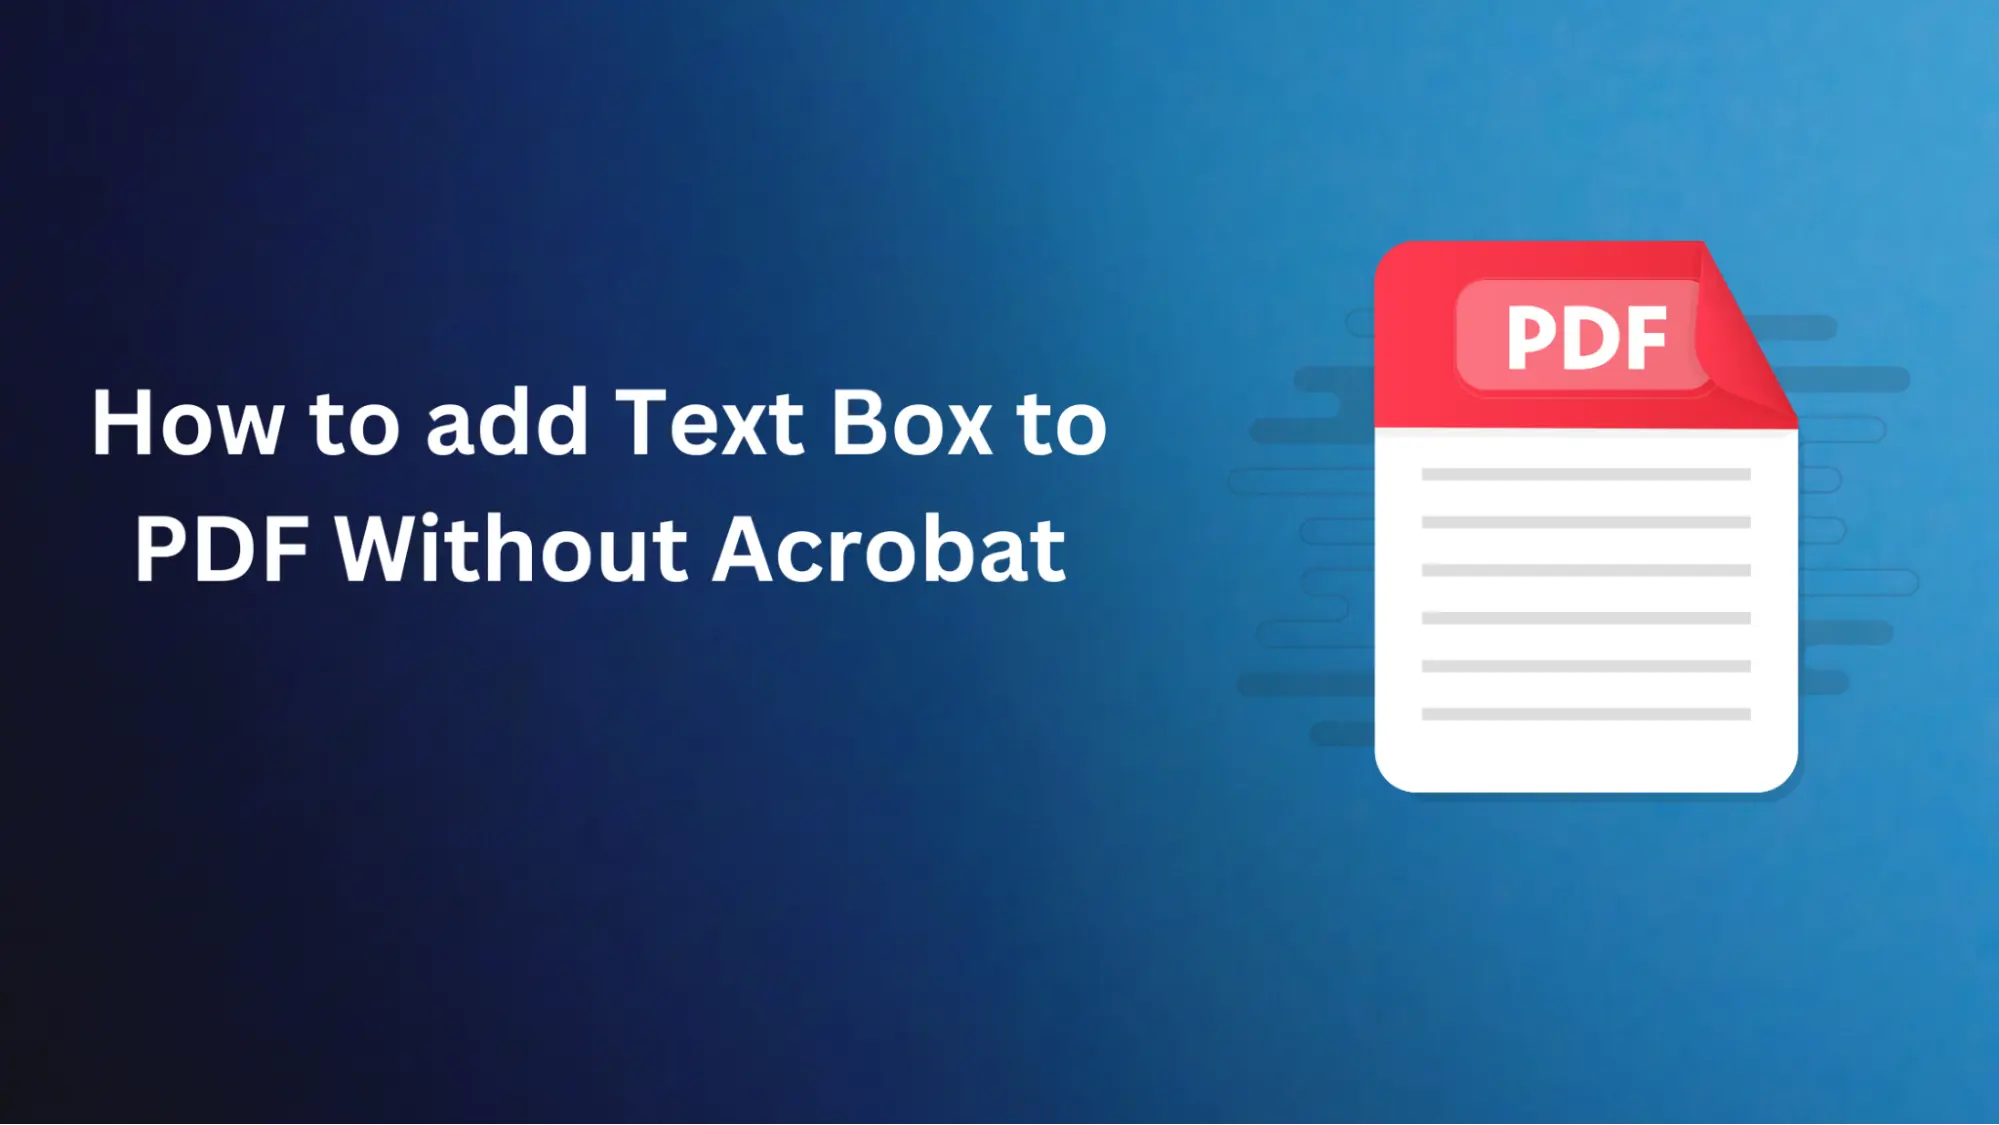 How to Add Text Box to PDF Without Acrobat